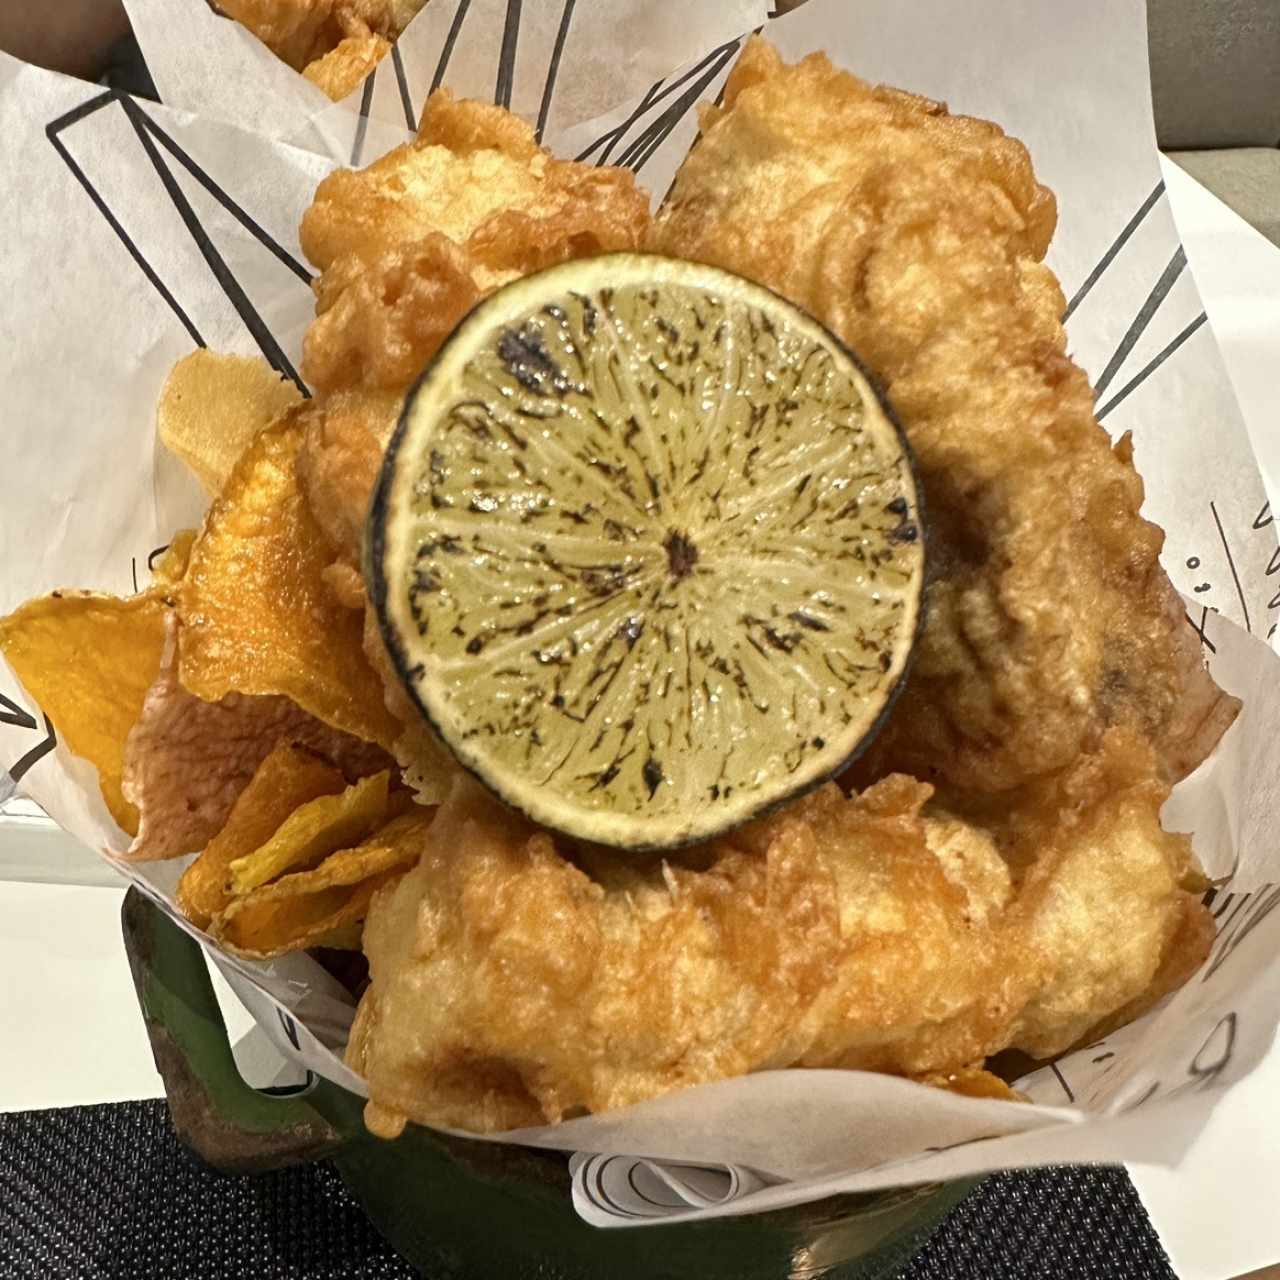 Fish, Chips and more chips